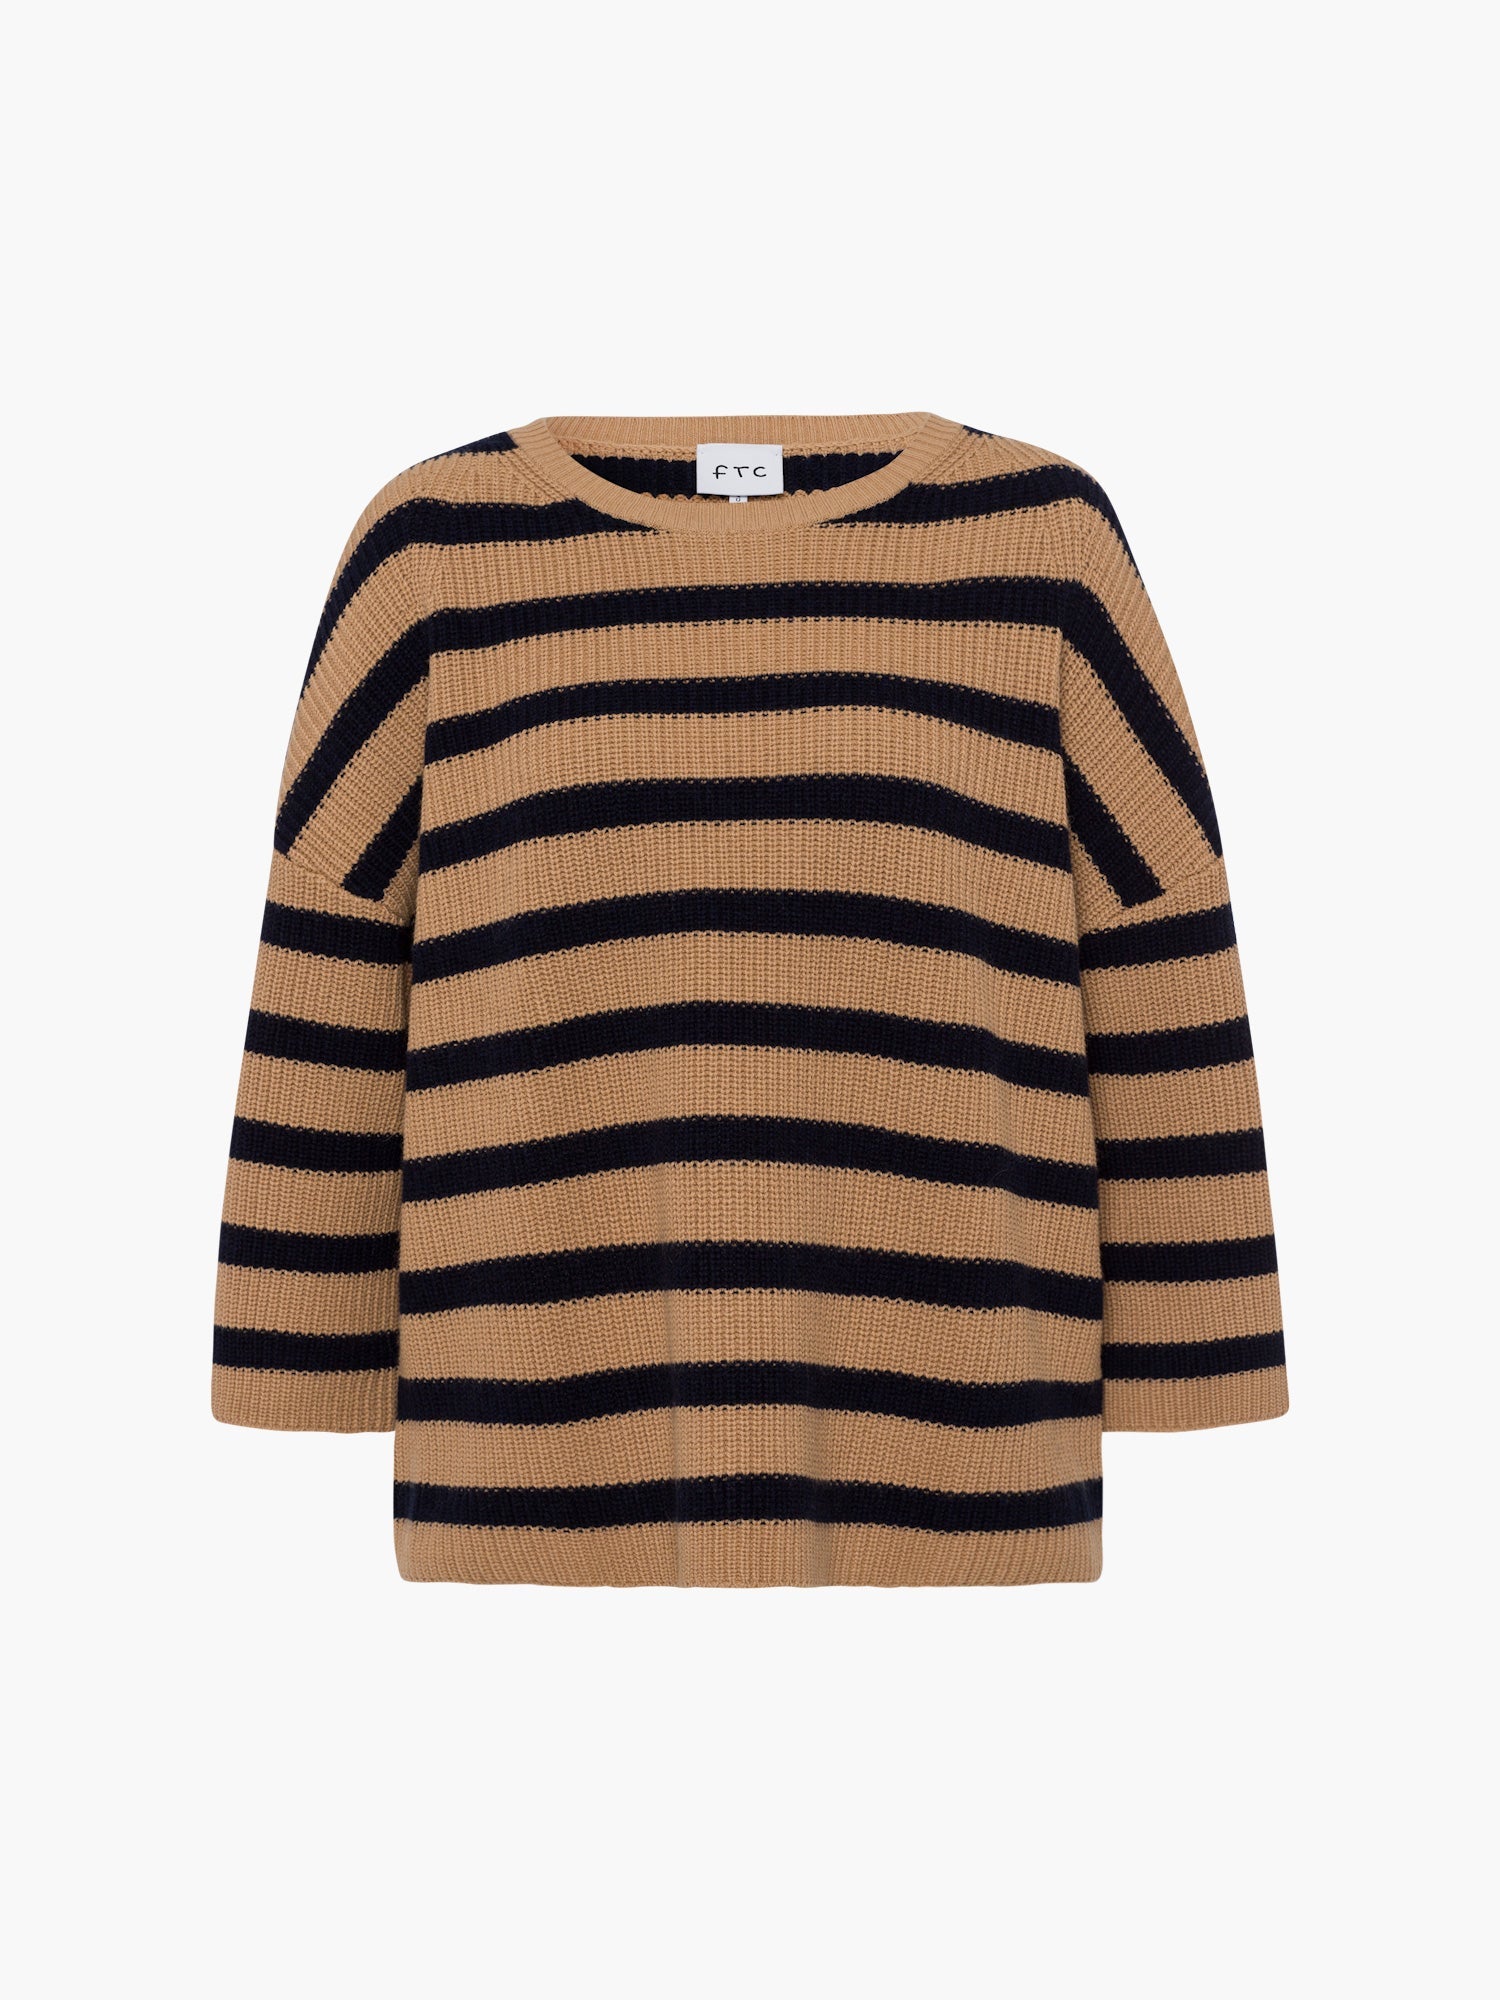 FTC-Cashmere-OUTLET-SALE-Pullover-Boatneck-Strick-ARCHIVE-COLLECTION_5999de70-c67a-48b6-a7ea-76823135aaca.jpg